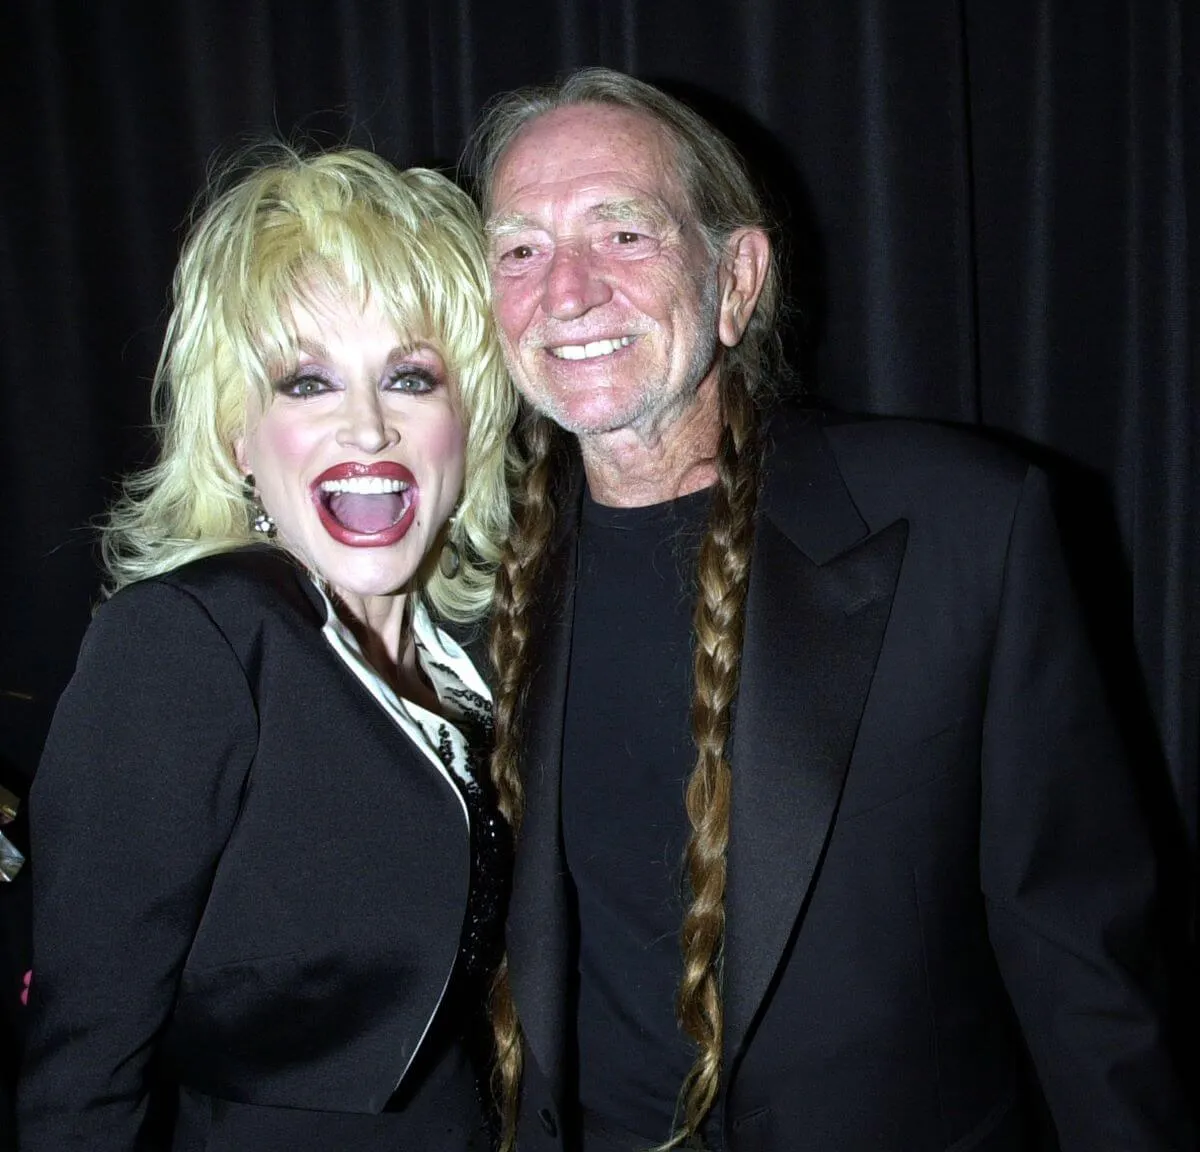 Dolly Parton and Willie Nelson wear black and smile together.